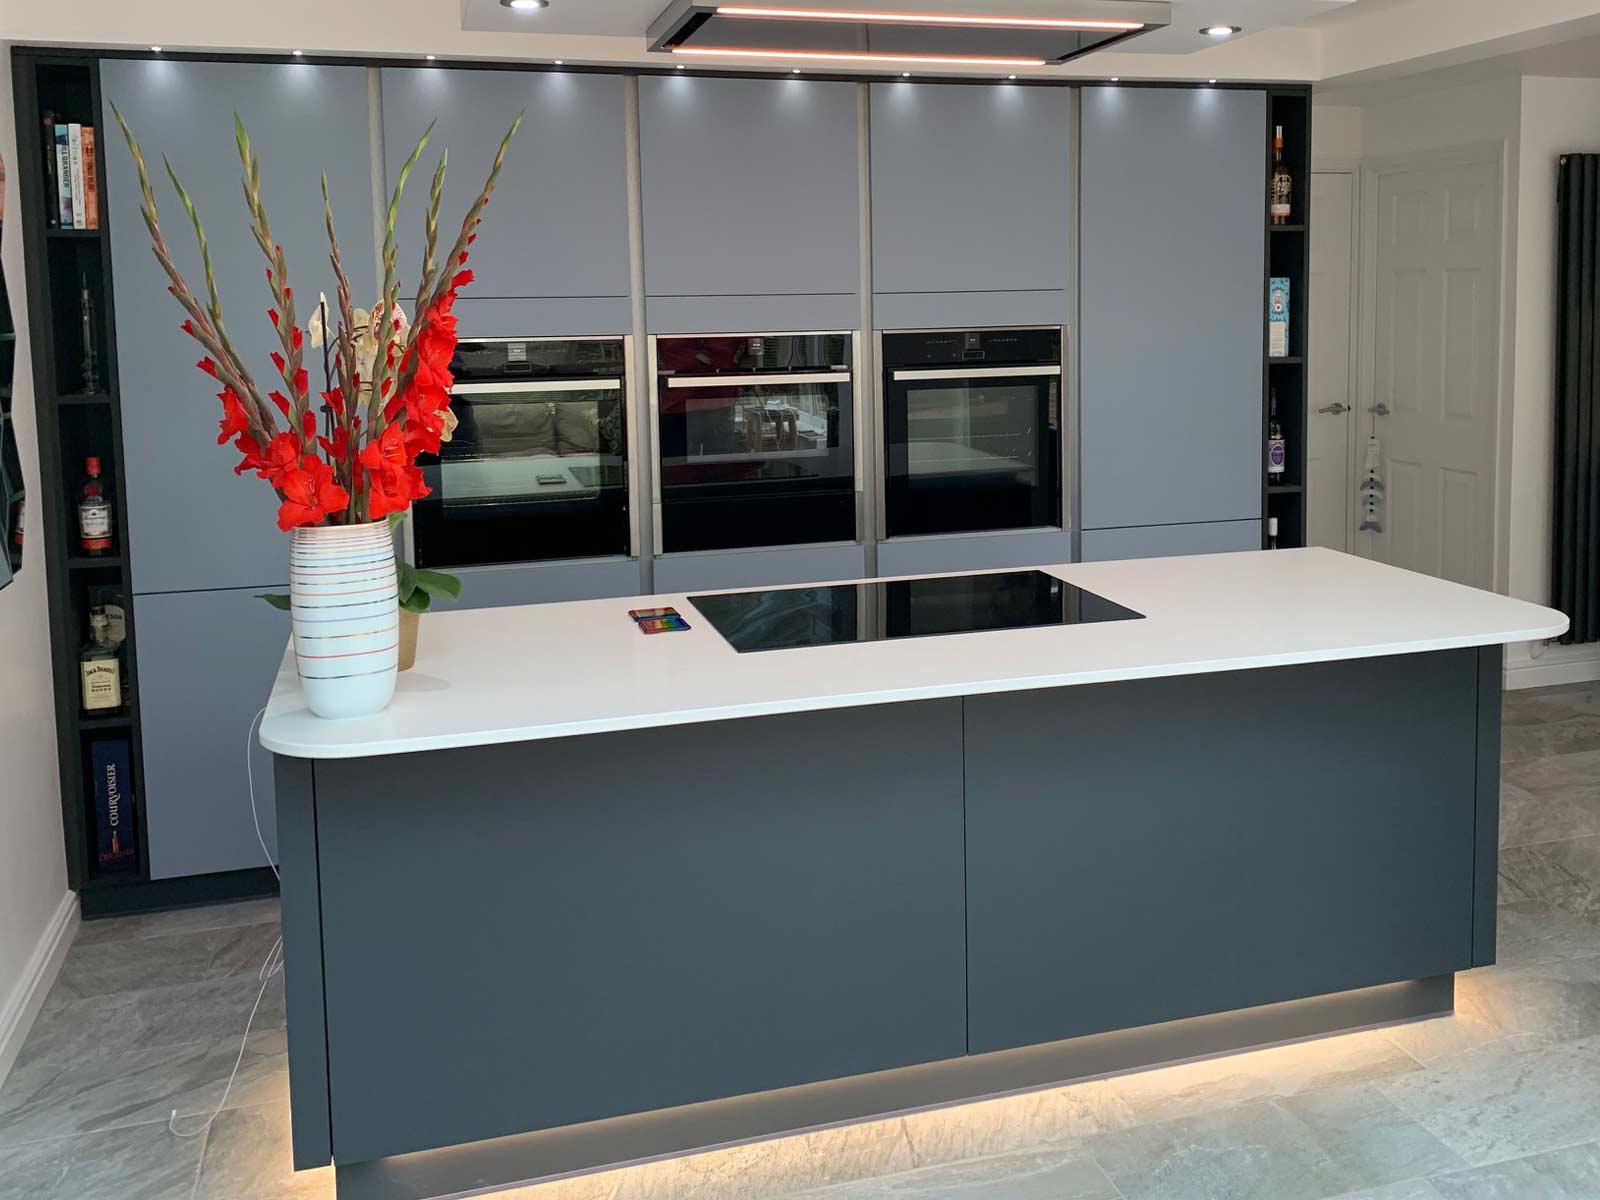 A contemporary grey kitchen with handleless doors and in-built oven